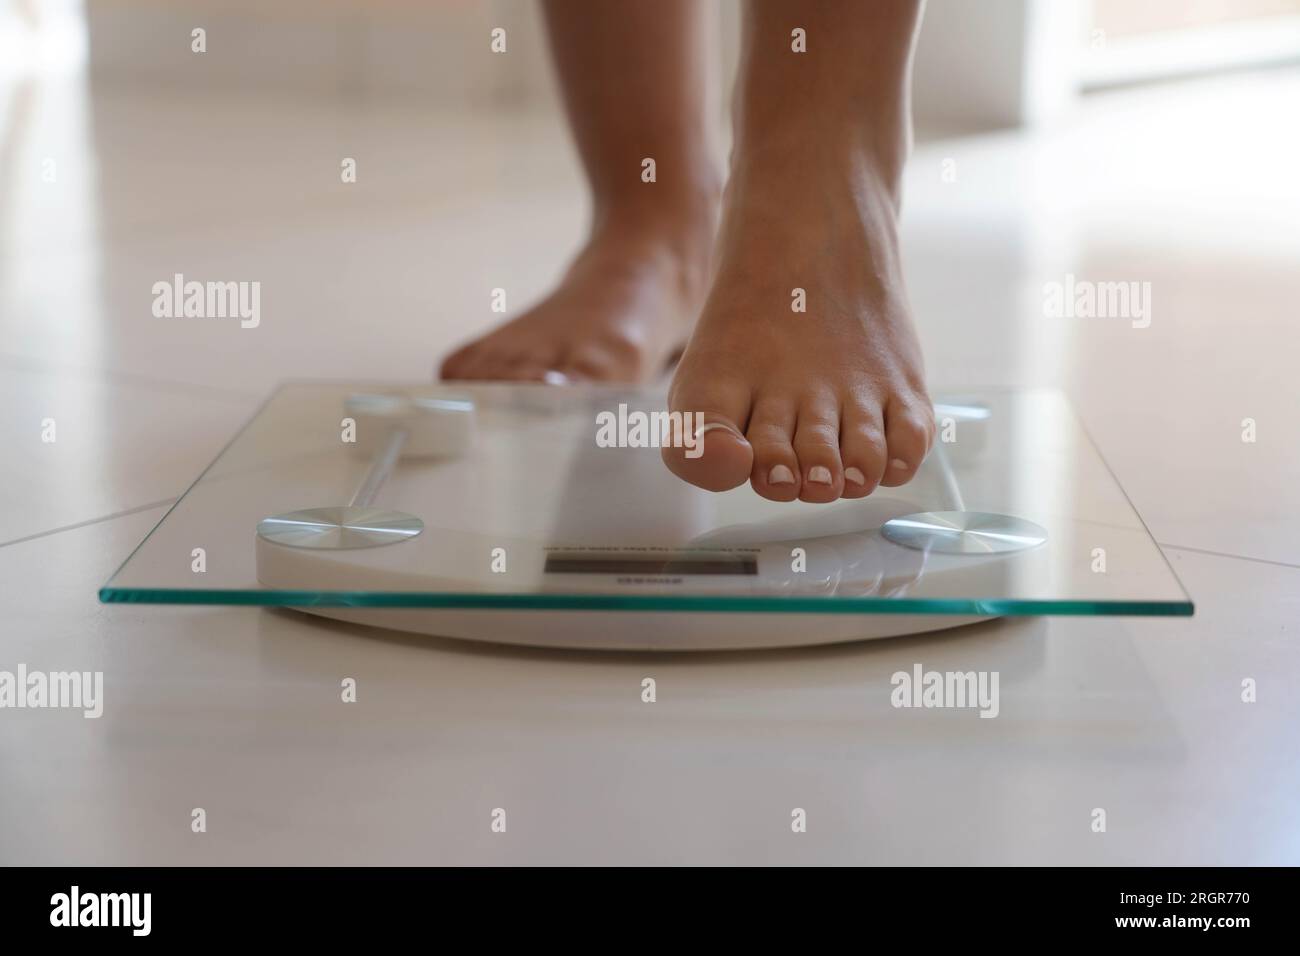 Close-up of female foot stepping on weight scale. Healthy lifestyle, diet and sport concept. Stock Photo